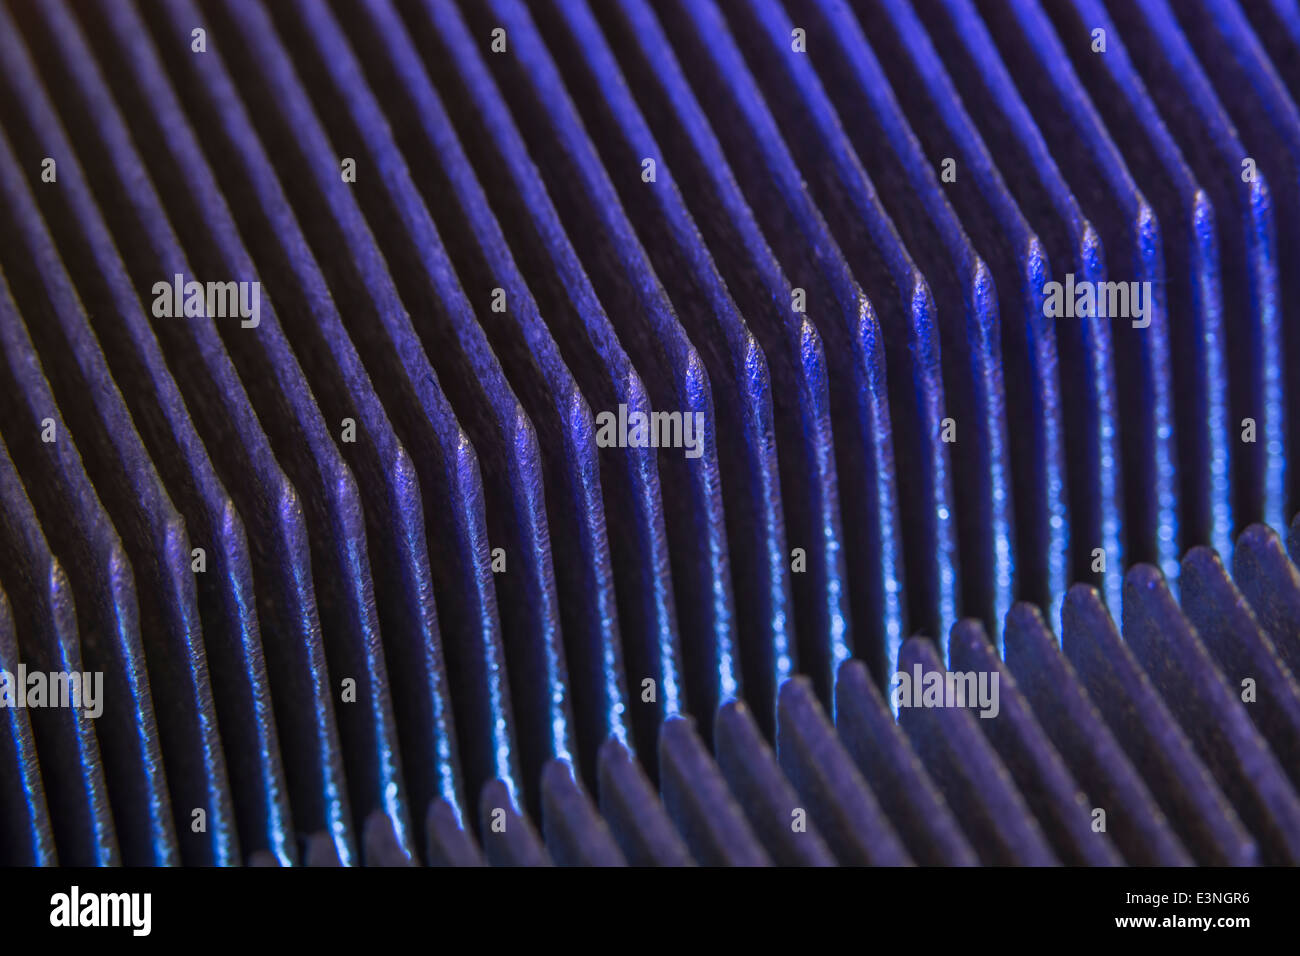 Macro-photo showing the cooling fins of a PC CPU cooling (fan) unit. For focus info see 'Description' section. Stock Photo